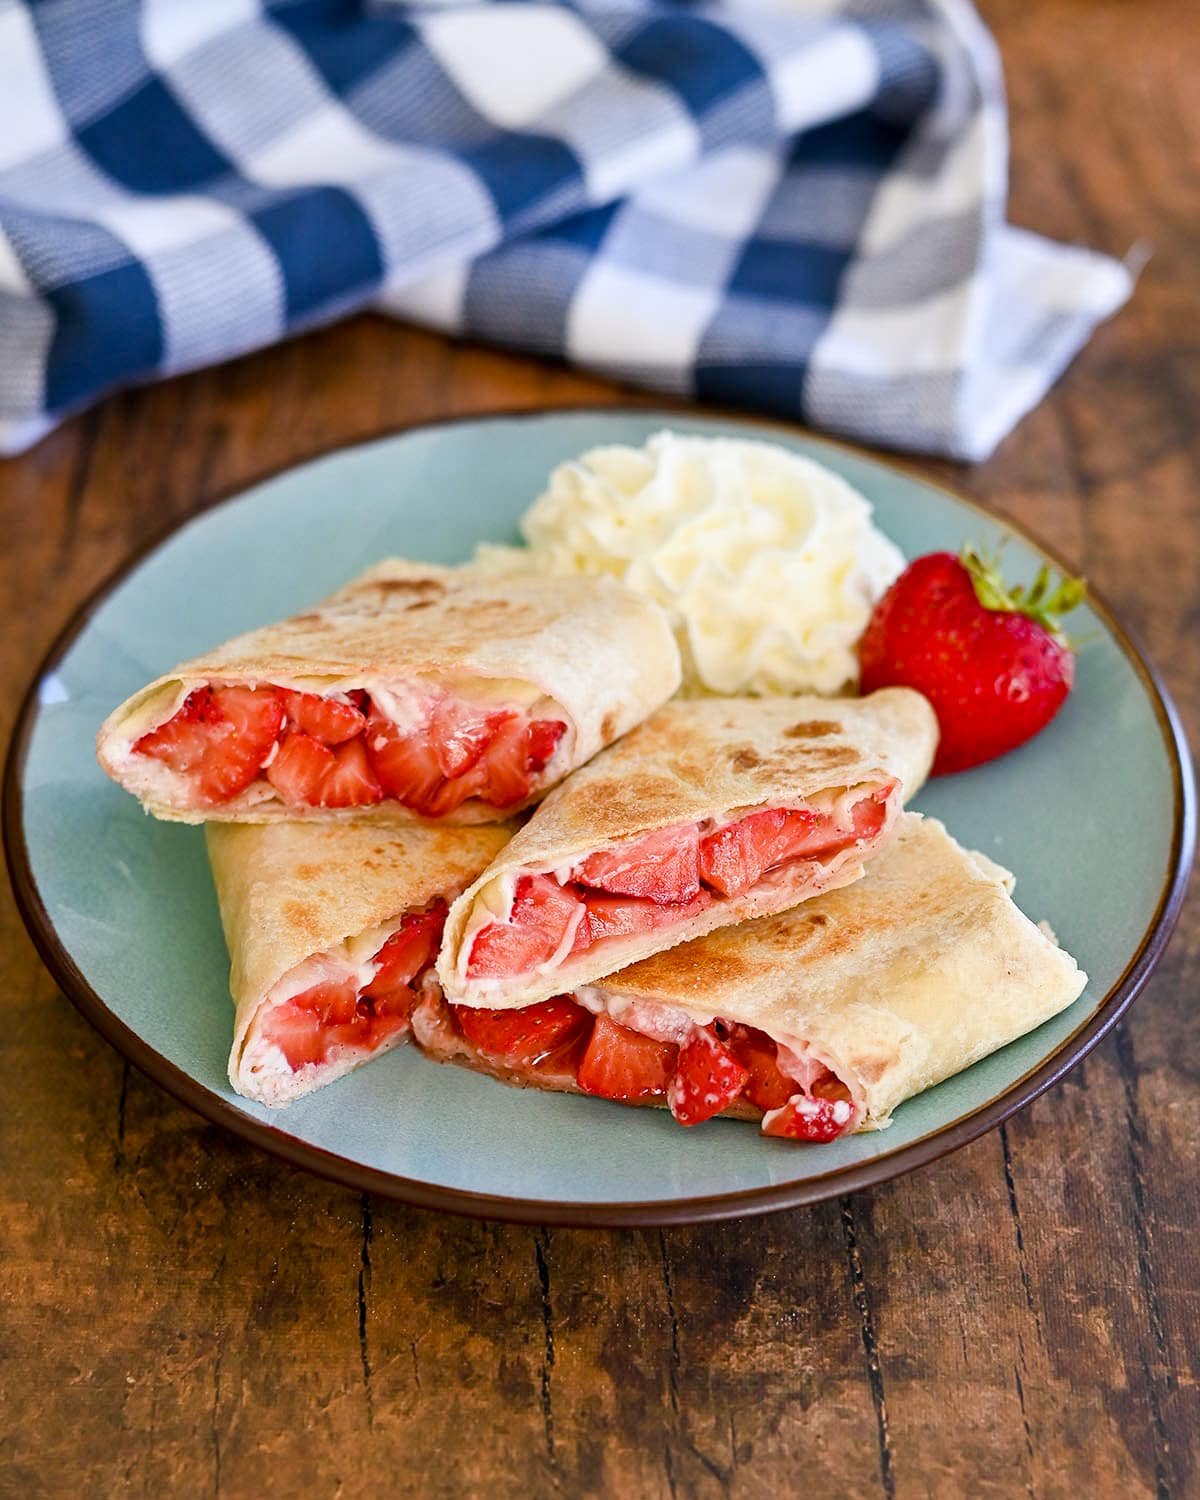 Finished strawberry burritos on a plate with whipped cream next to a checkered towel.